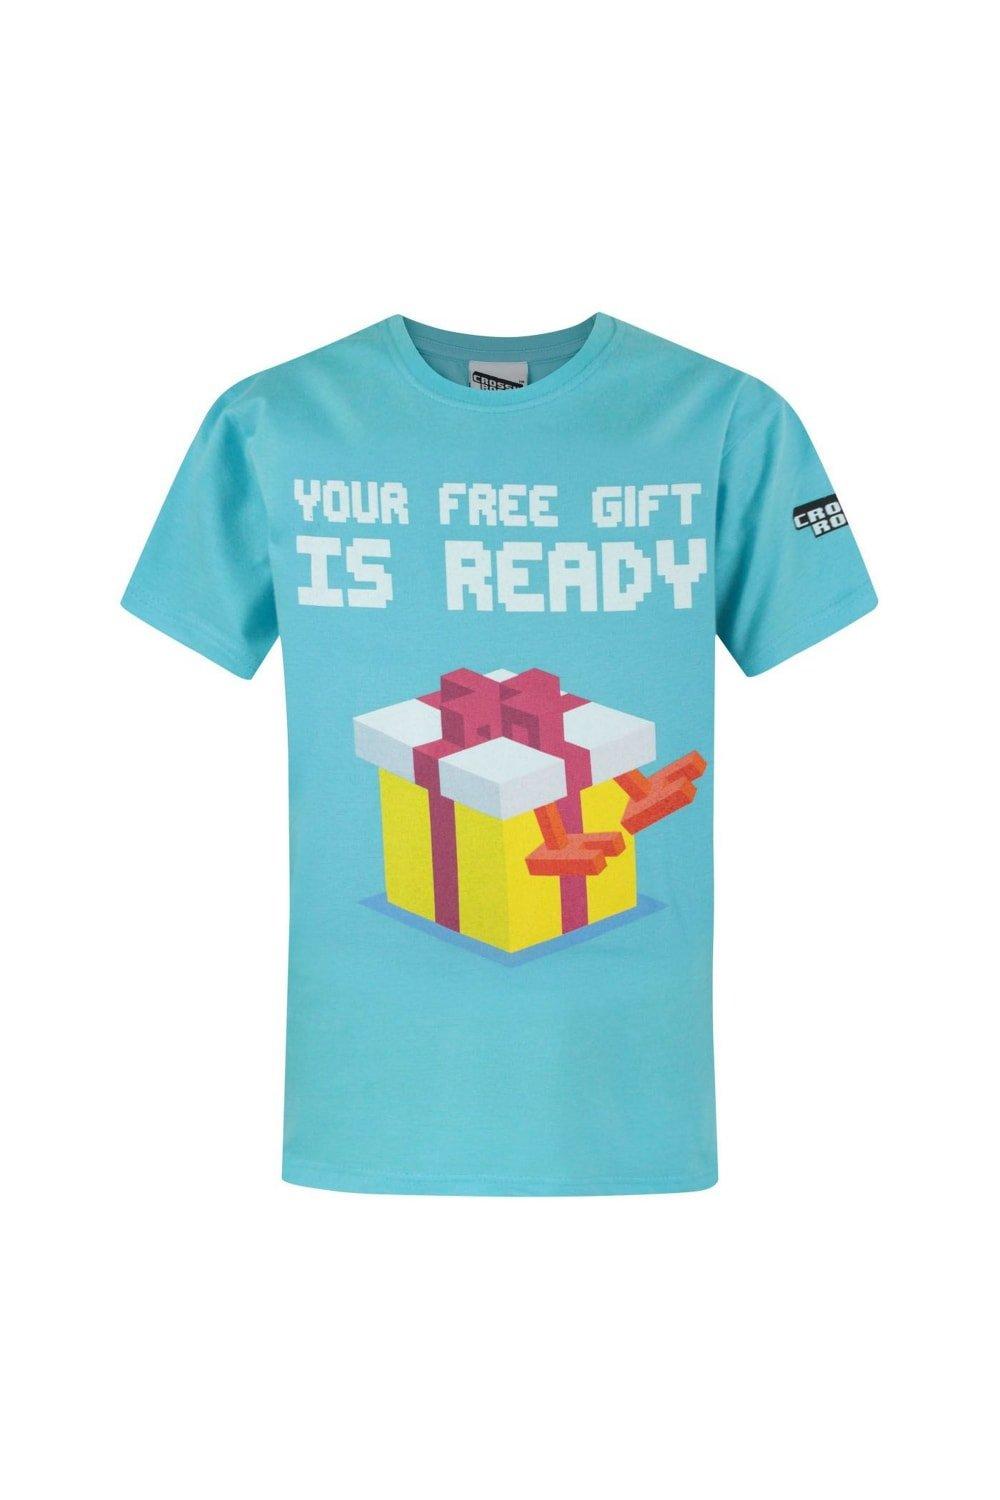 Crossy Road Official Free Gift Short Sleeved T-Shirt